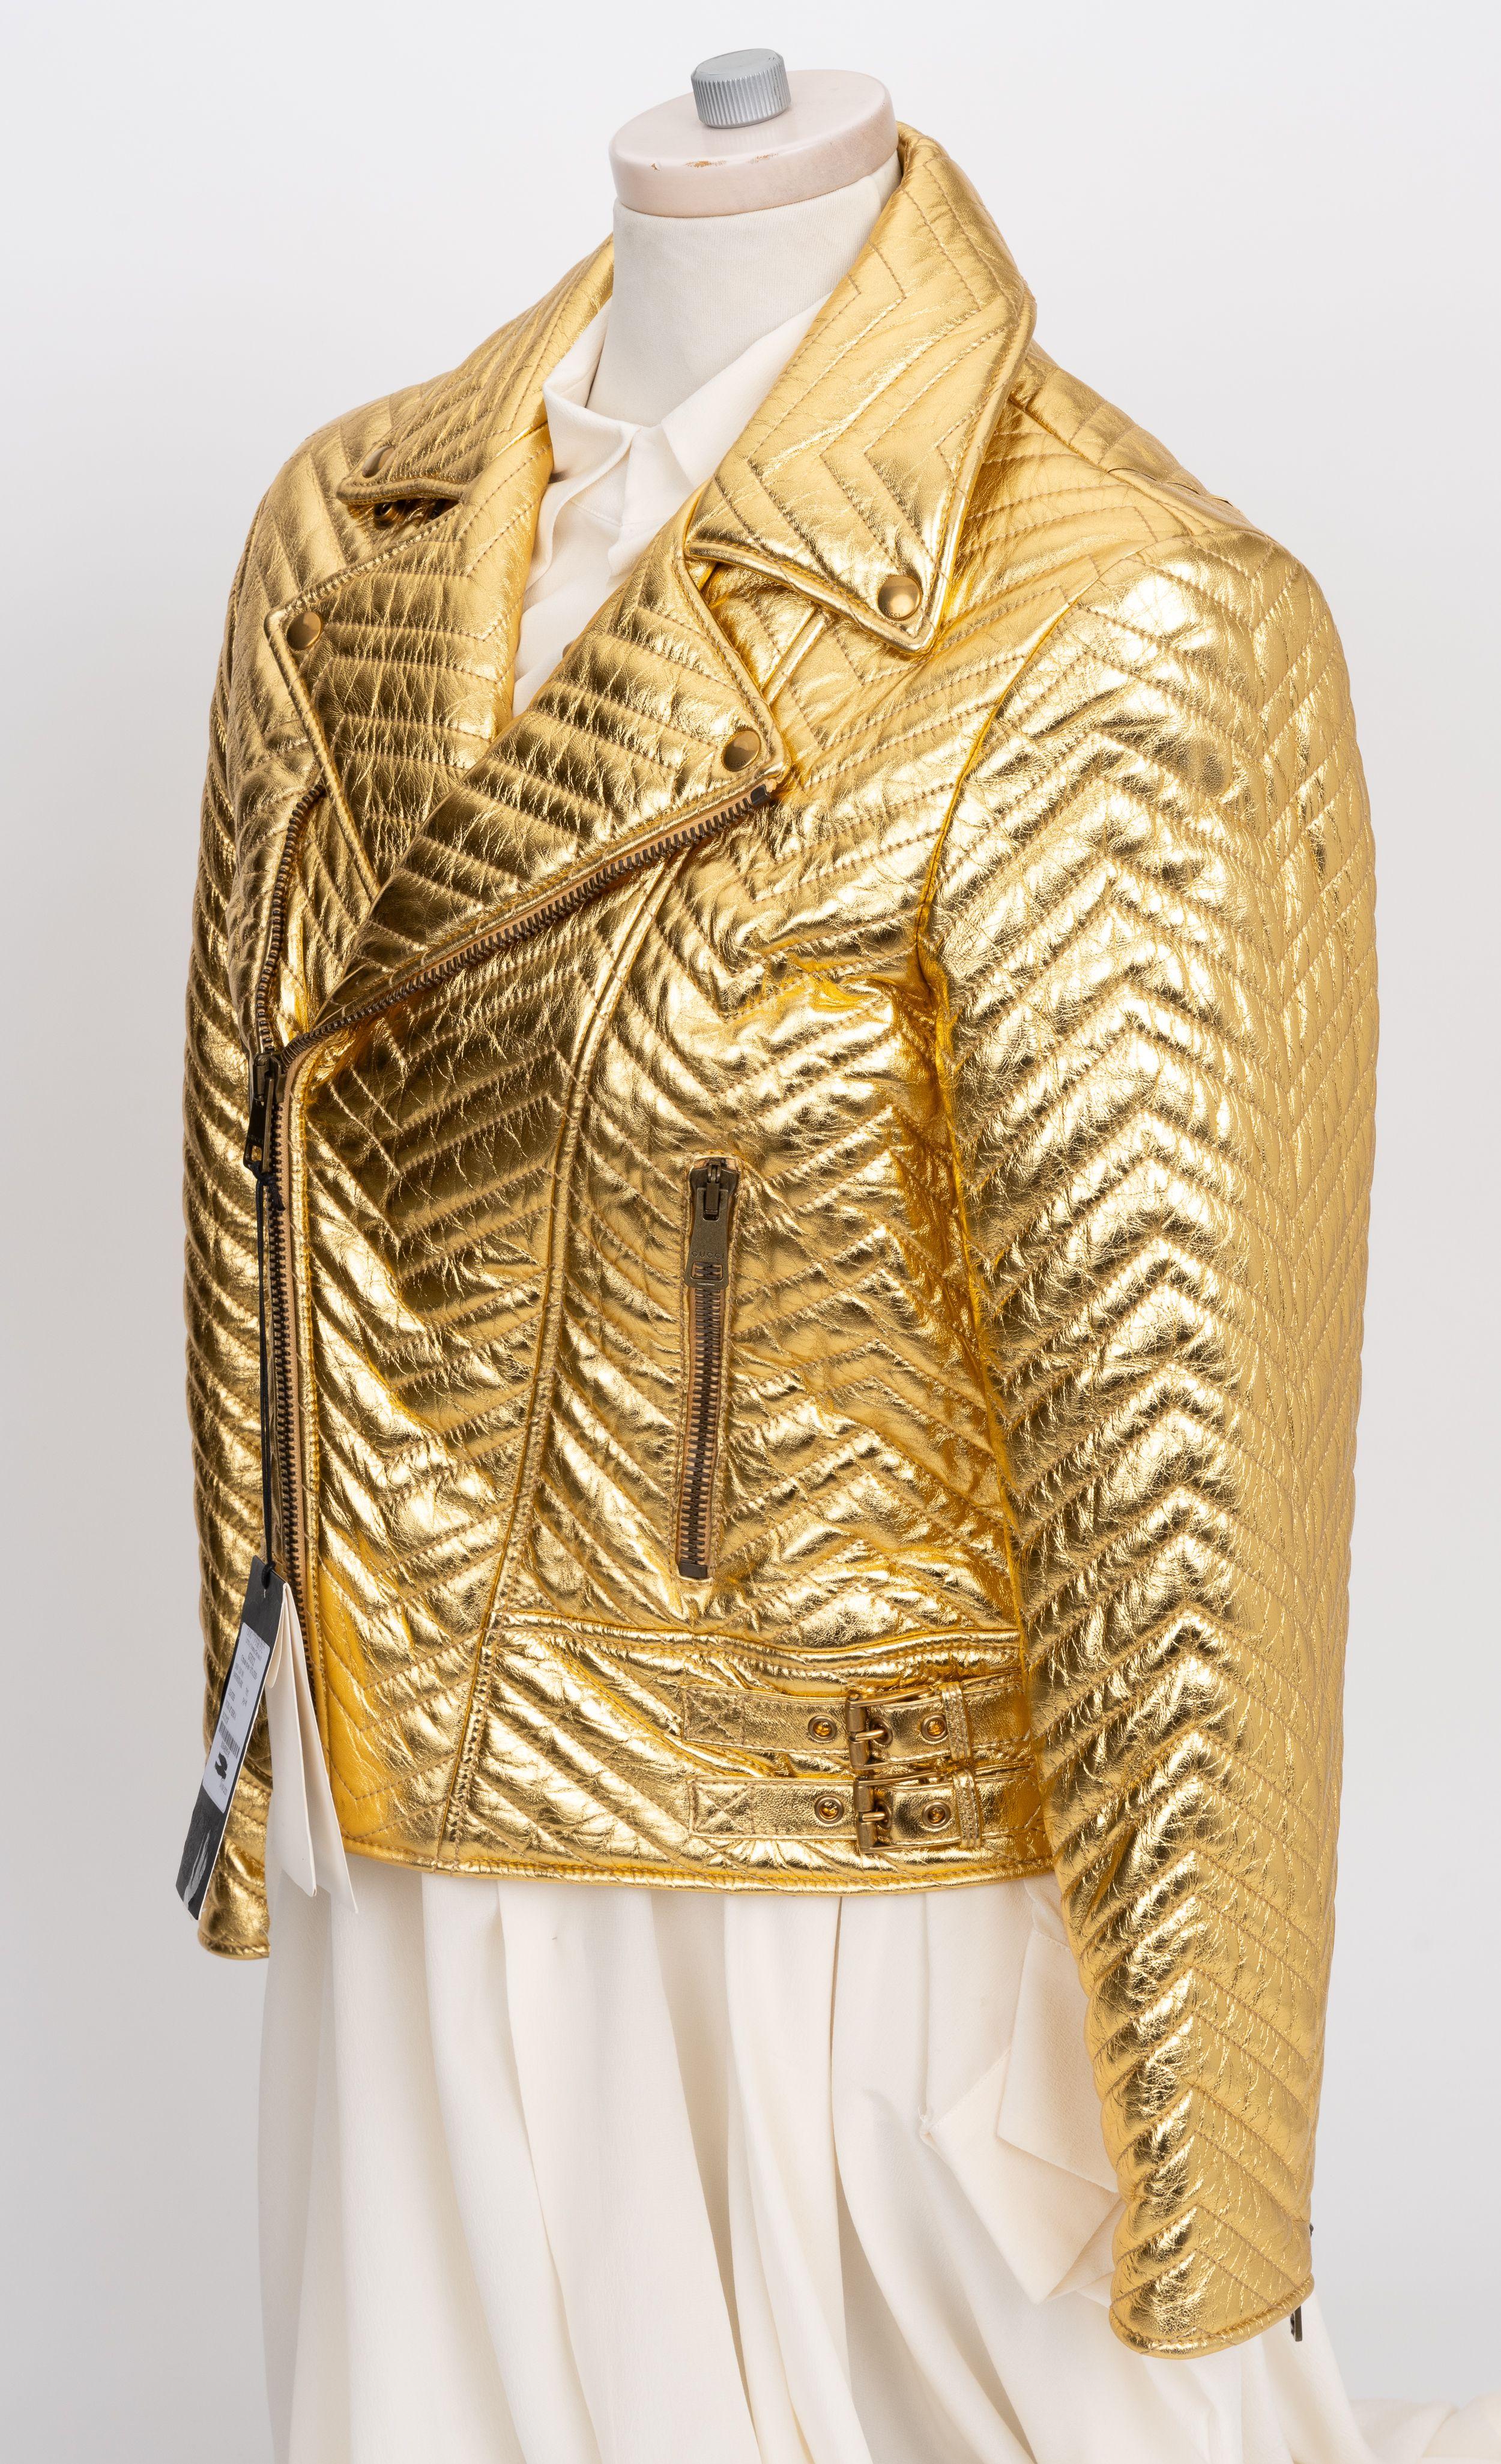 Gucci New Marmont Gold Biker Jacket In New Condition For Sale In West Hollywood, CA